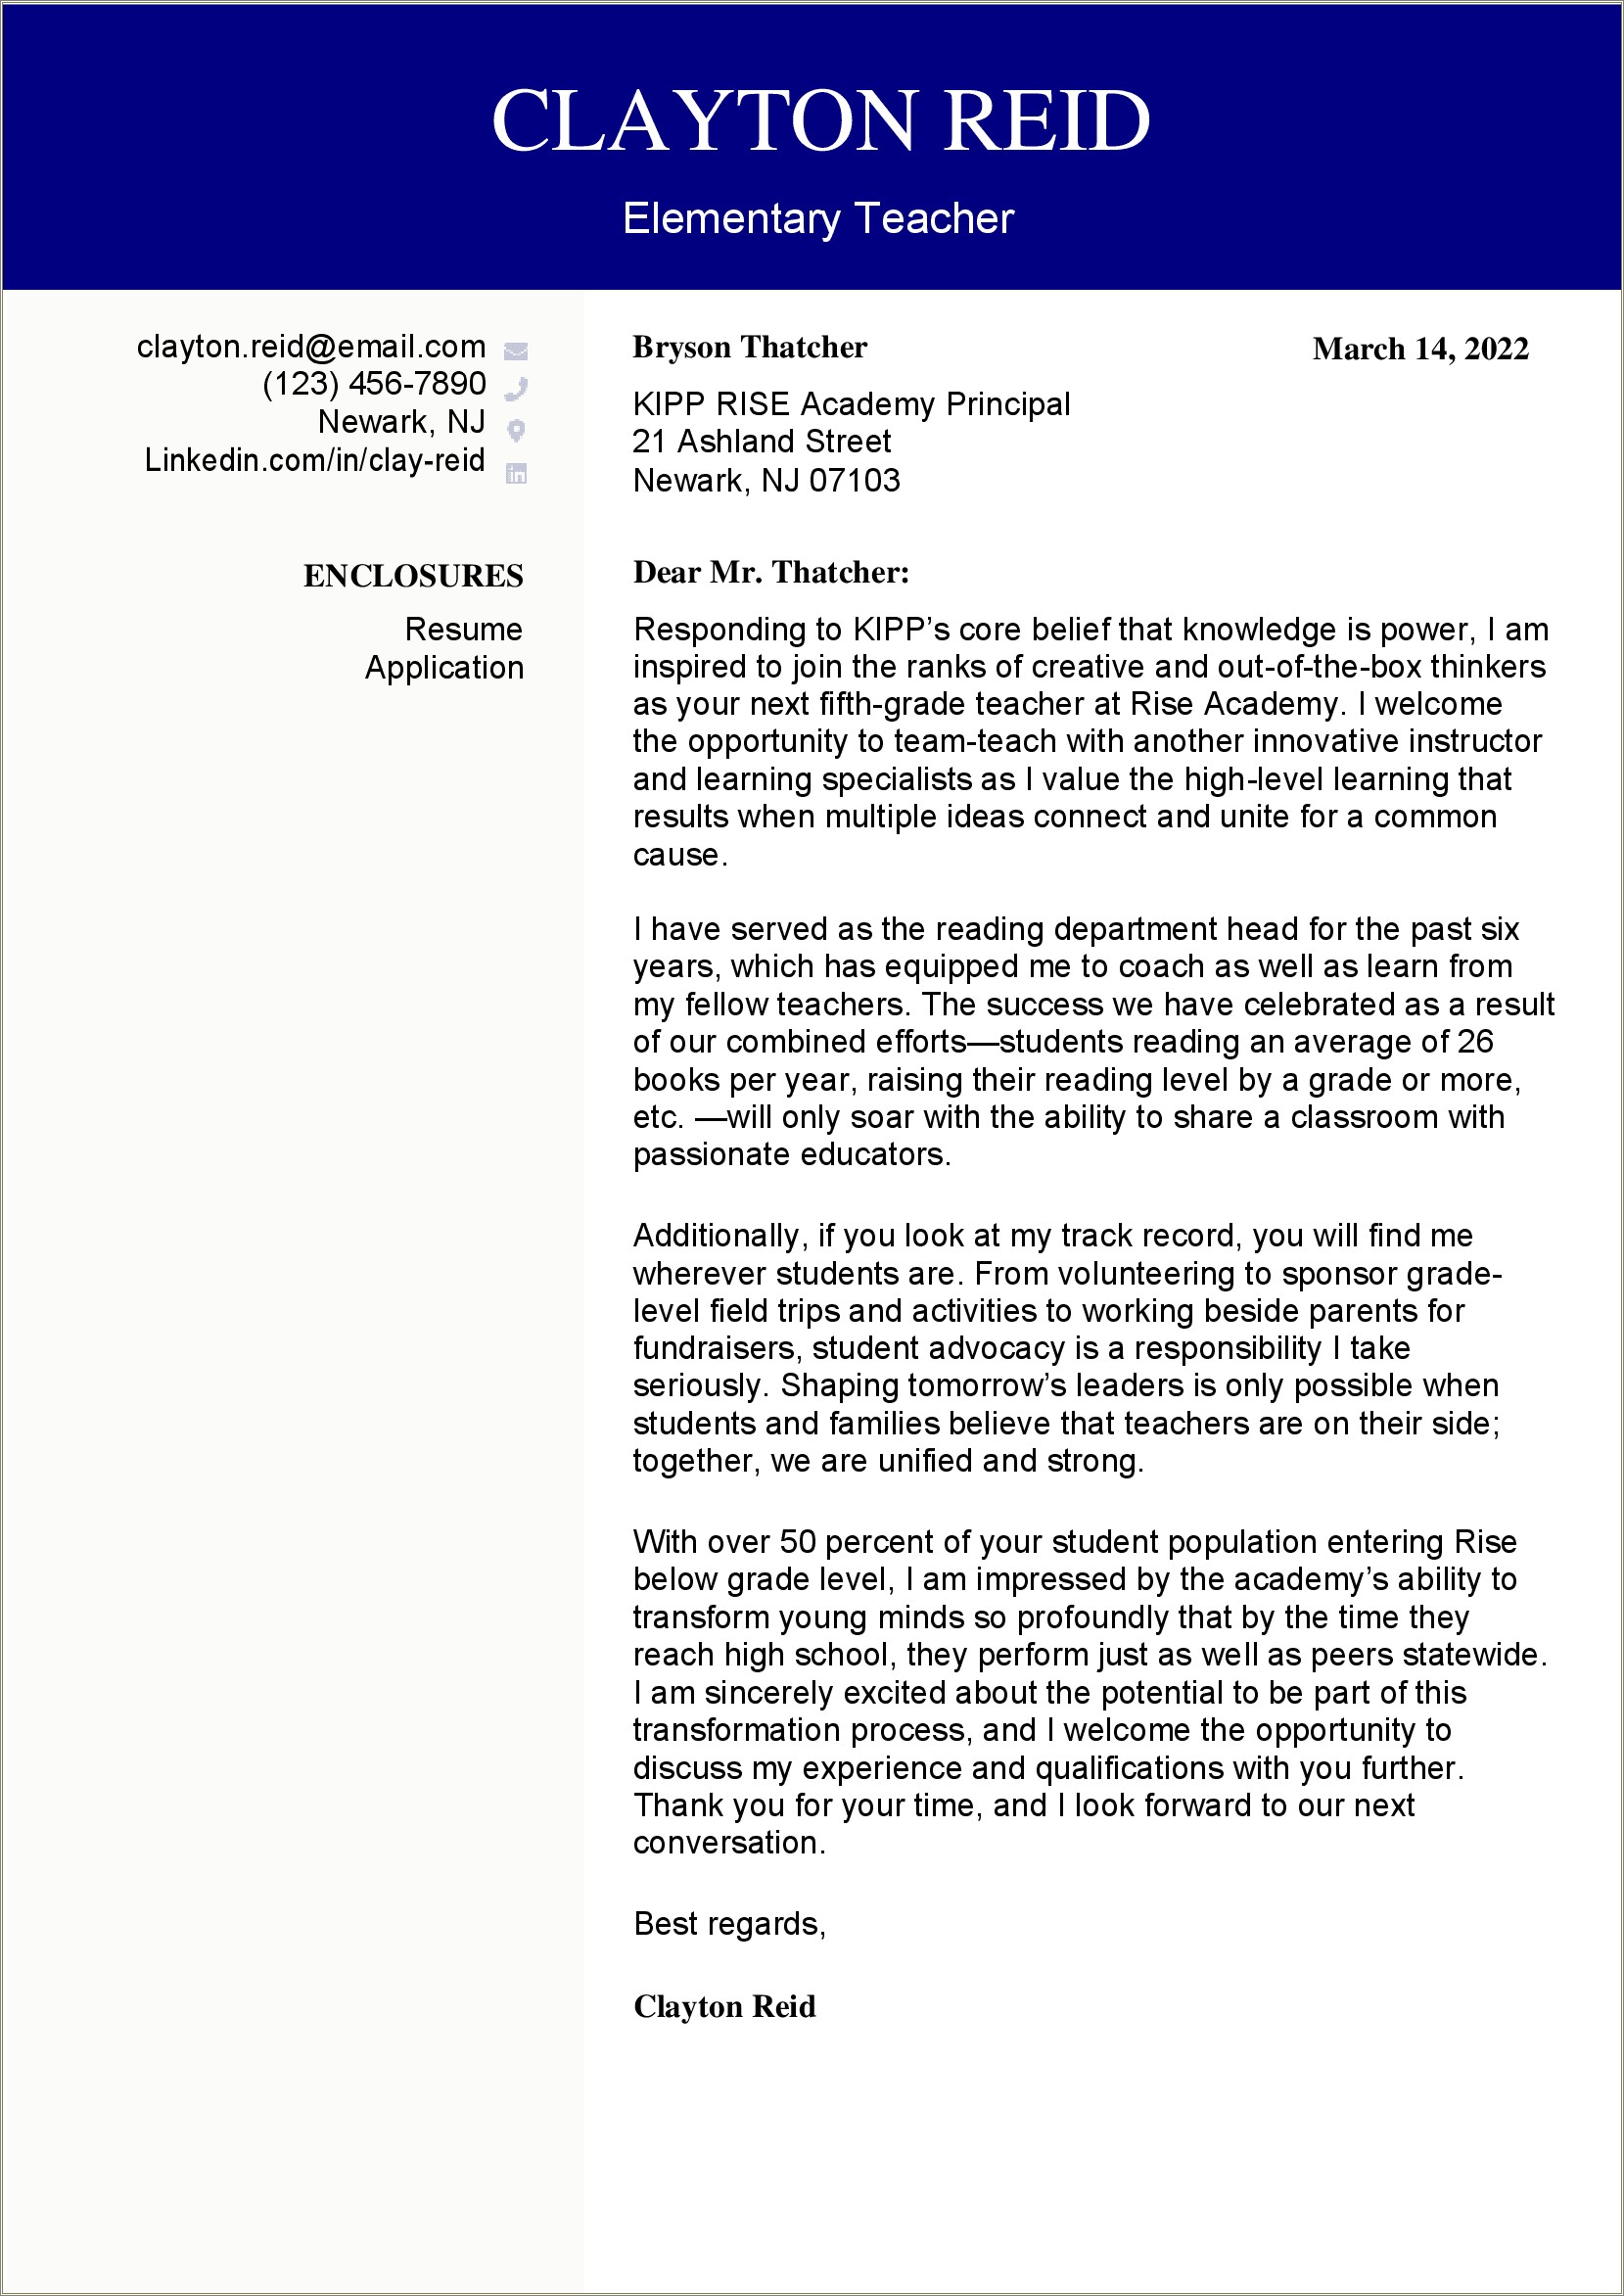 Separate Cover Letter Or Combine With Resume